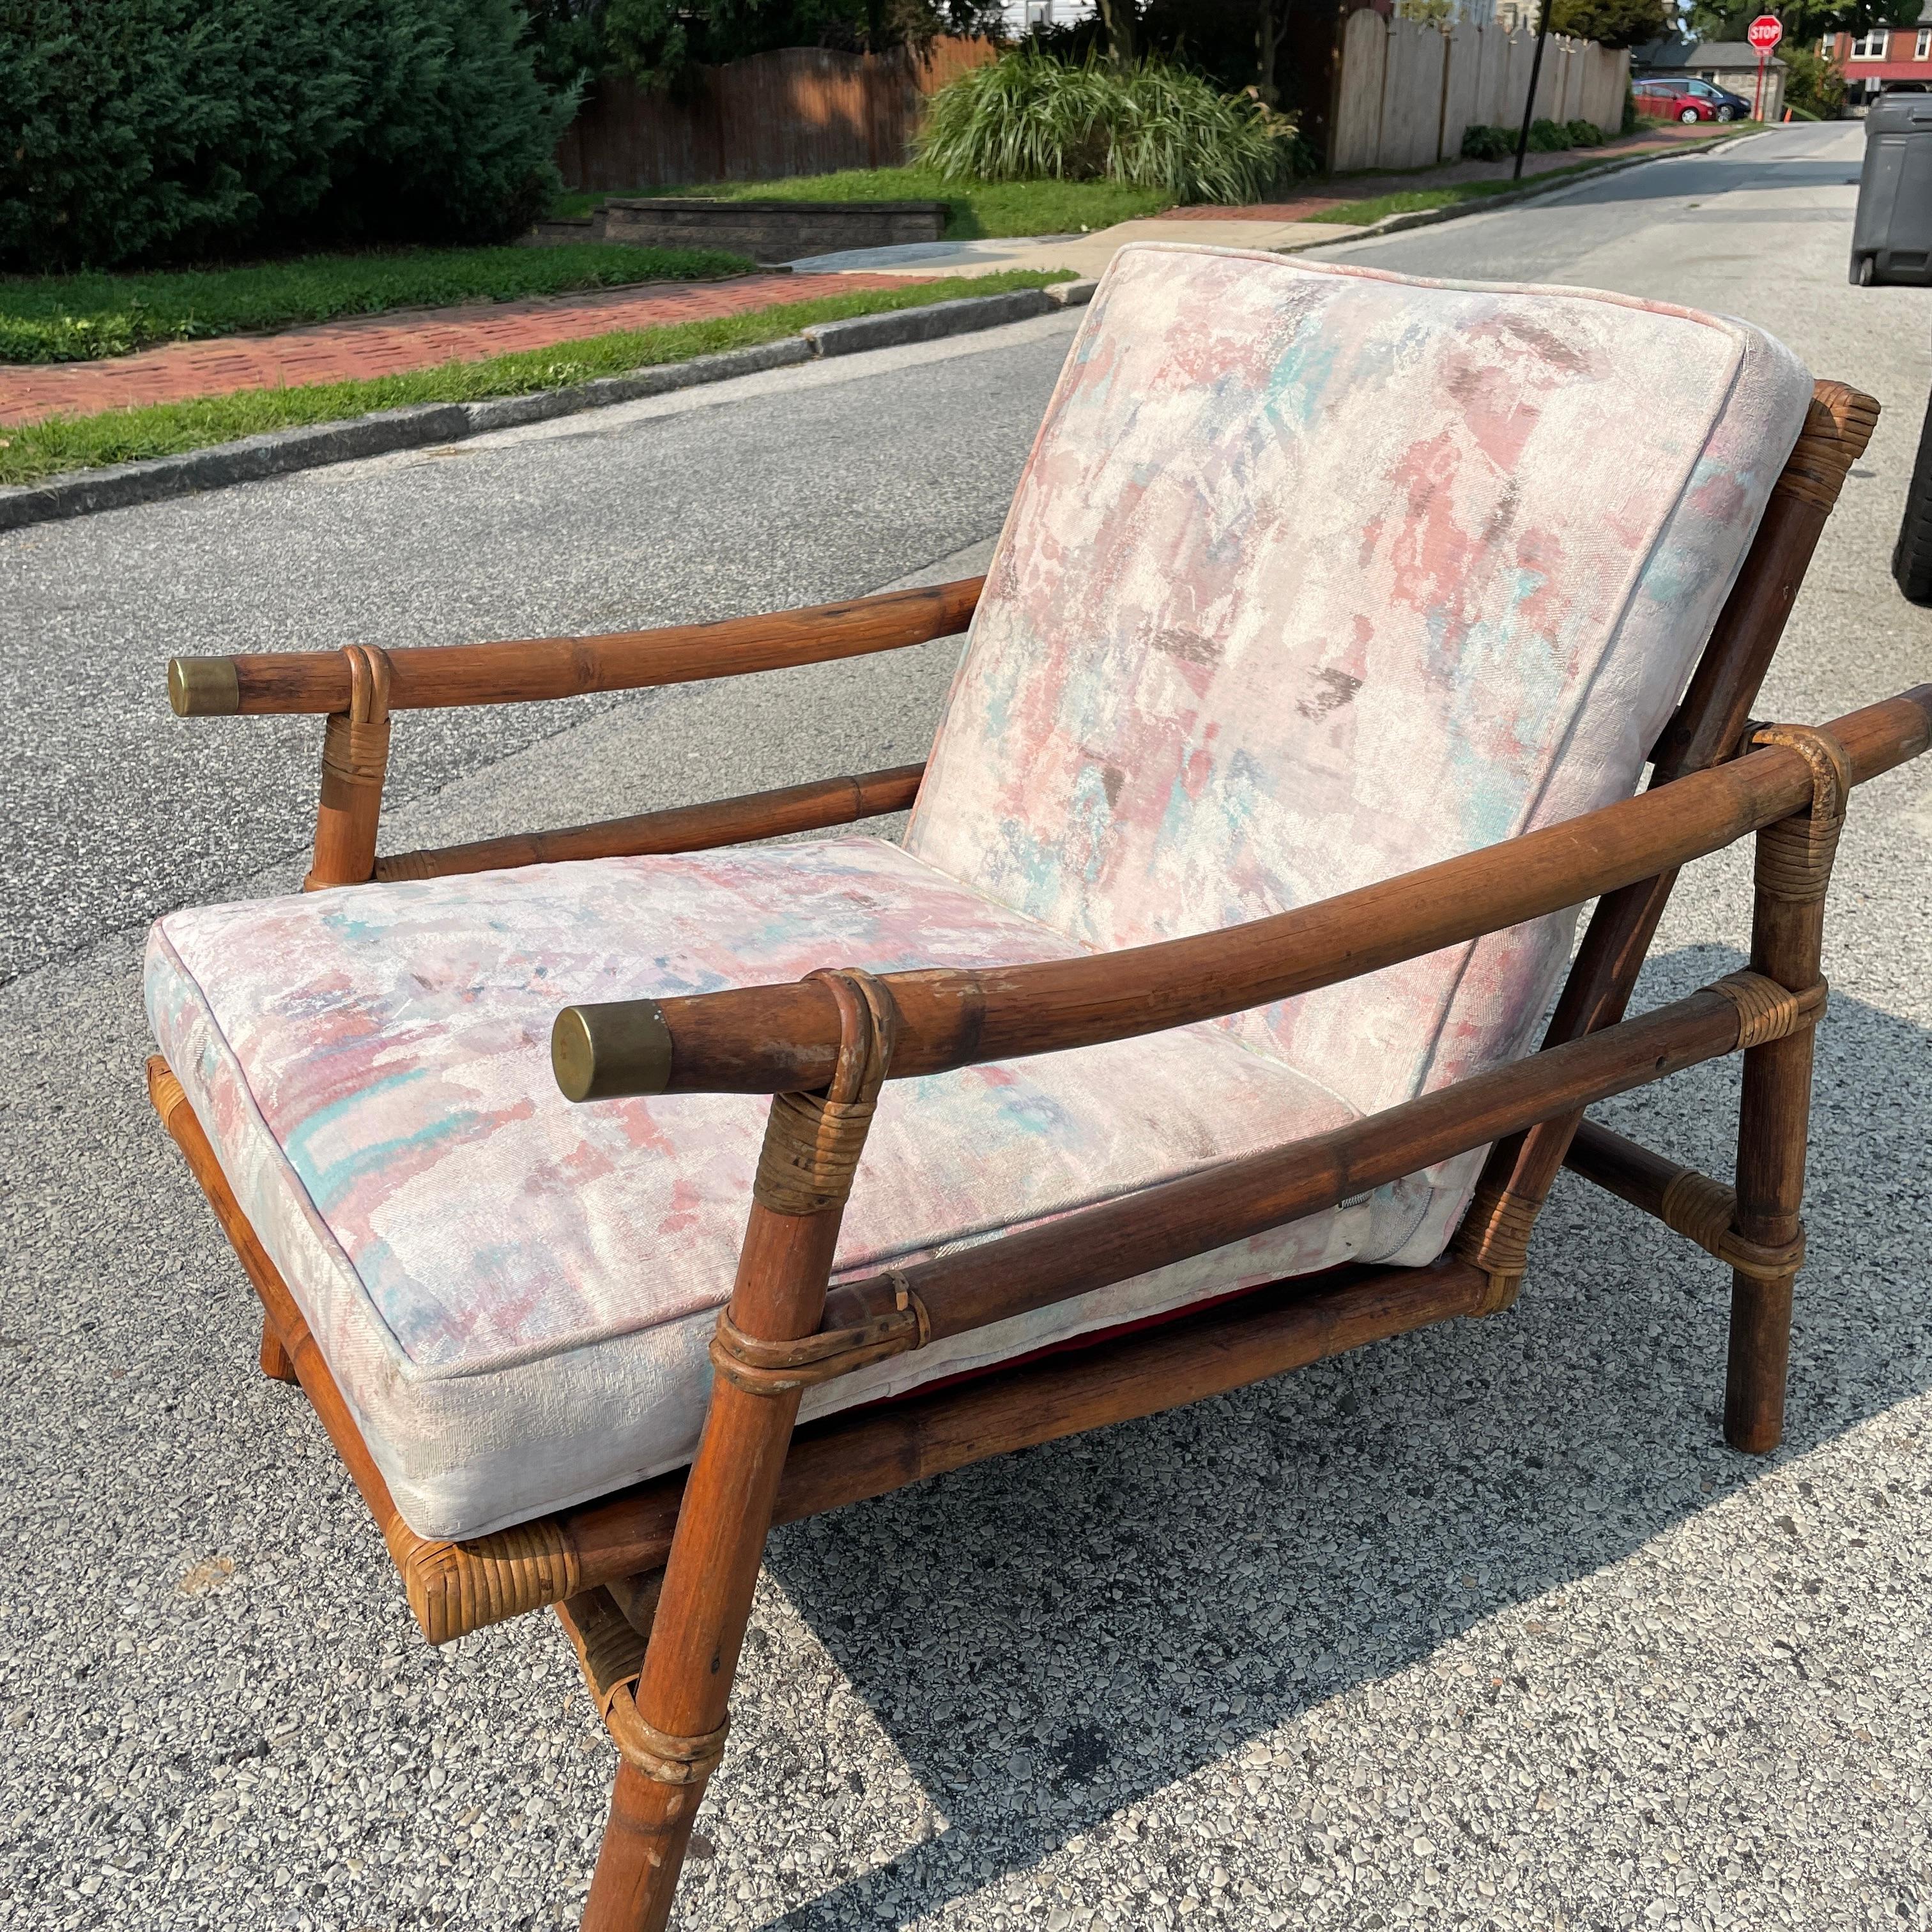 A vintage Far Horizons rattan lounge chair by John Wisner for Ficks Reed. The bamboo has been re-oiled making it look like new. The cane backing of the seat is in good condition with only minor wear. The cushions are soft and clean. A great piece